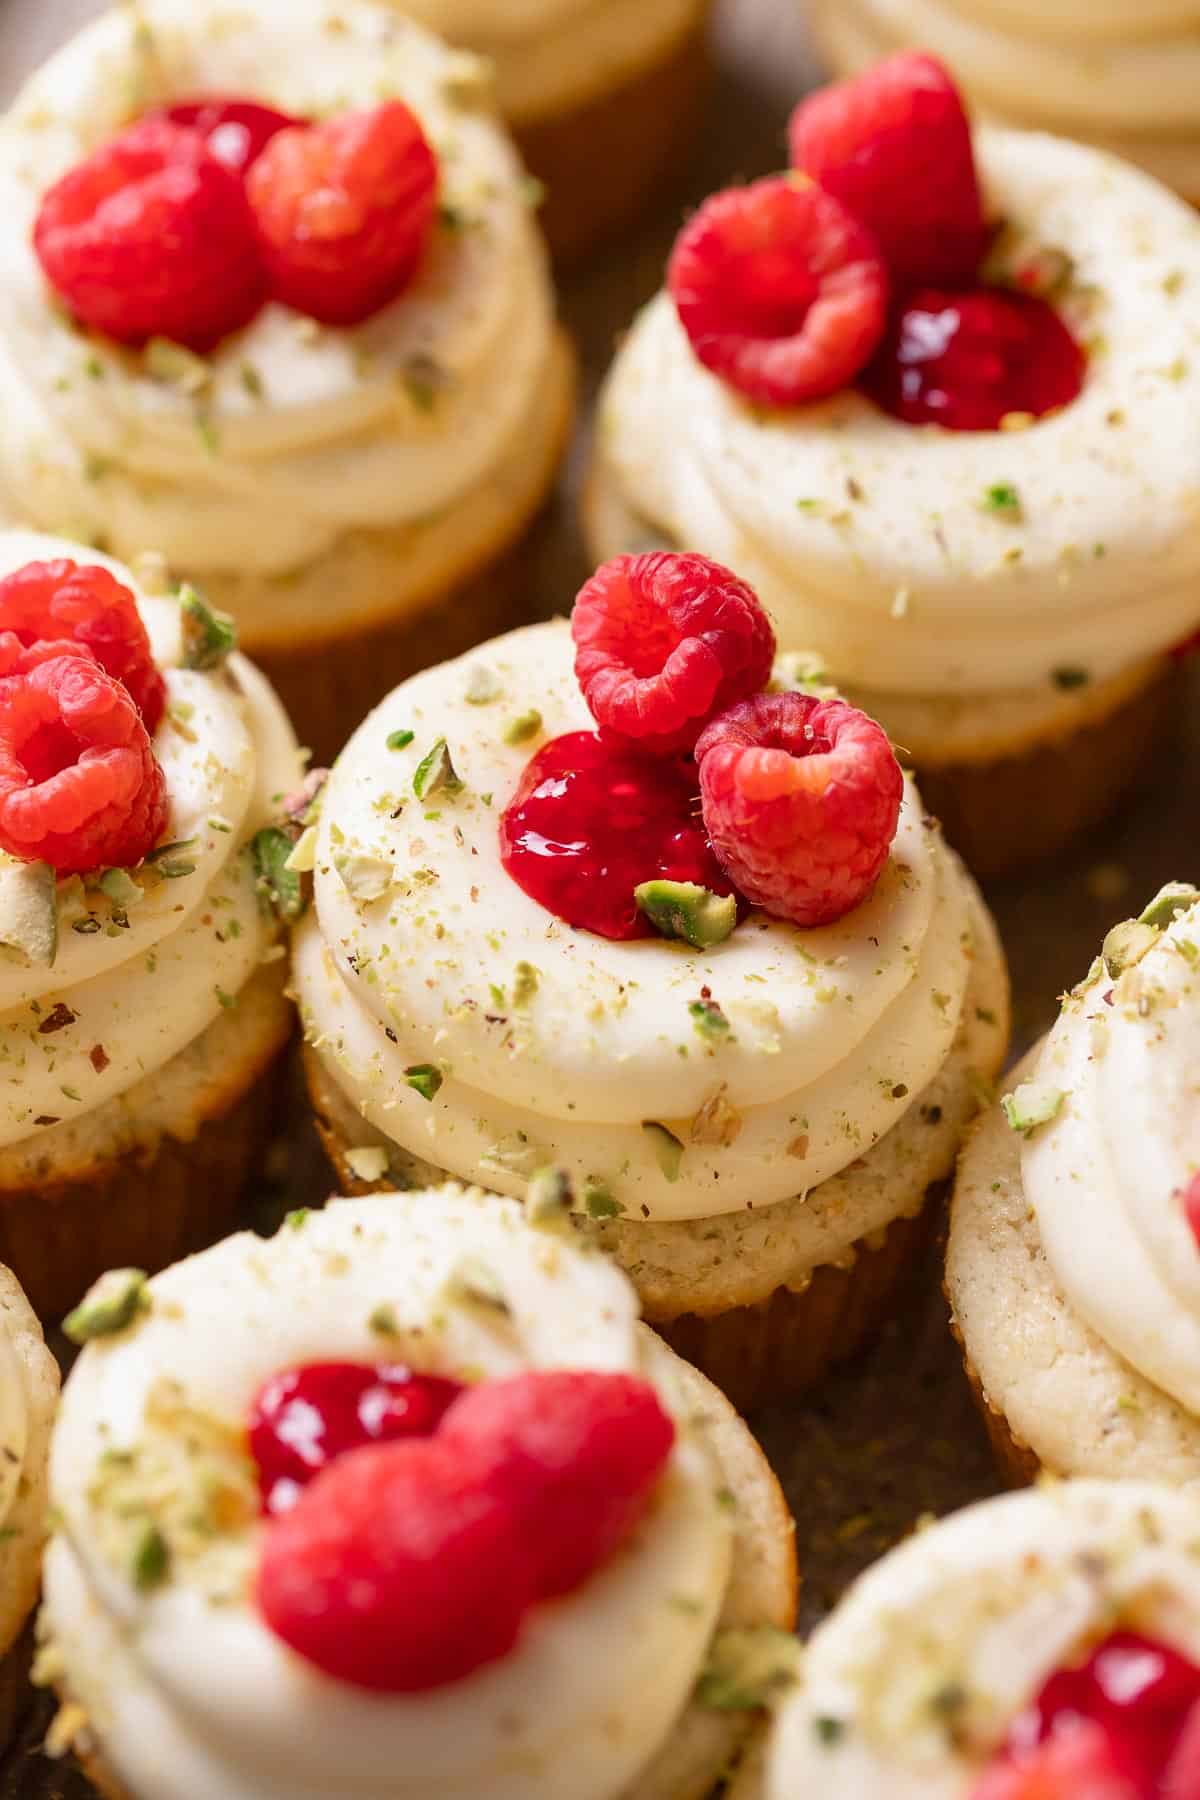 Lemon and raspberry cupcakes topped with lemon frosting and fresh raspberries.